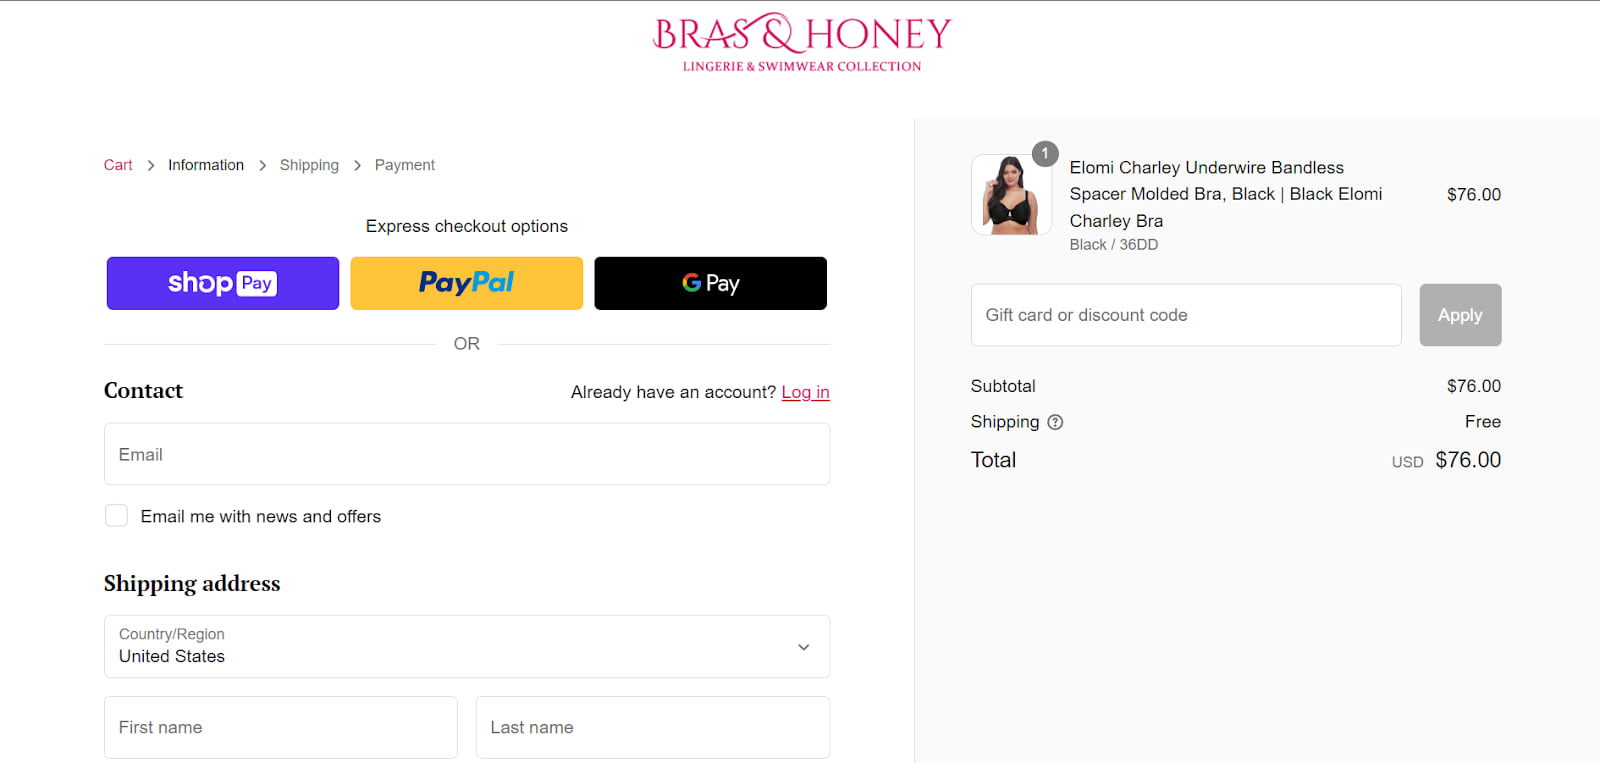 How To Use Bras & Honey Discount Code 2